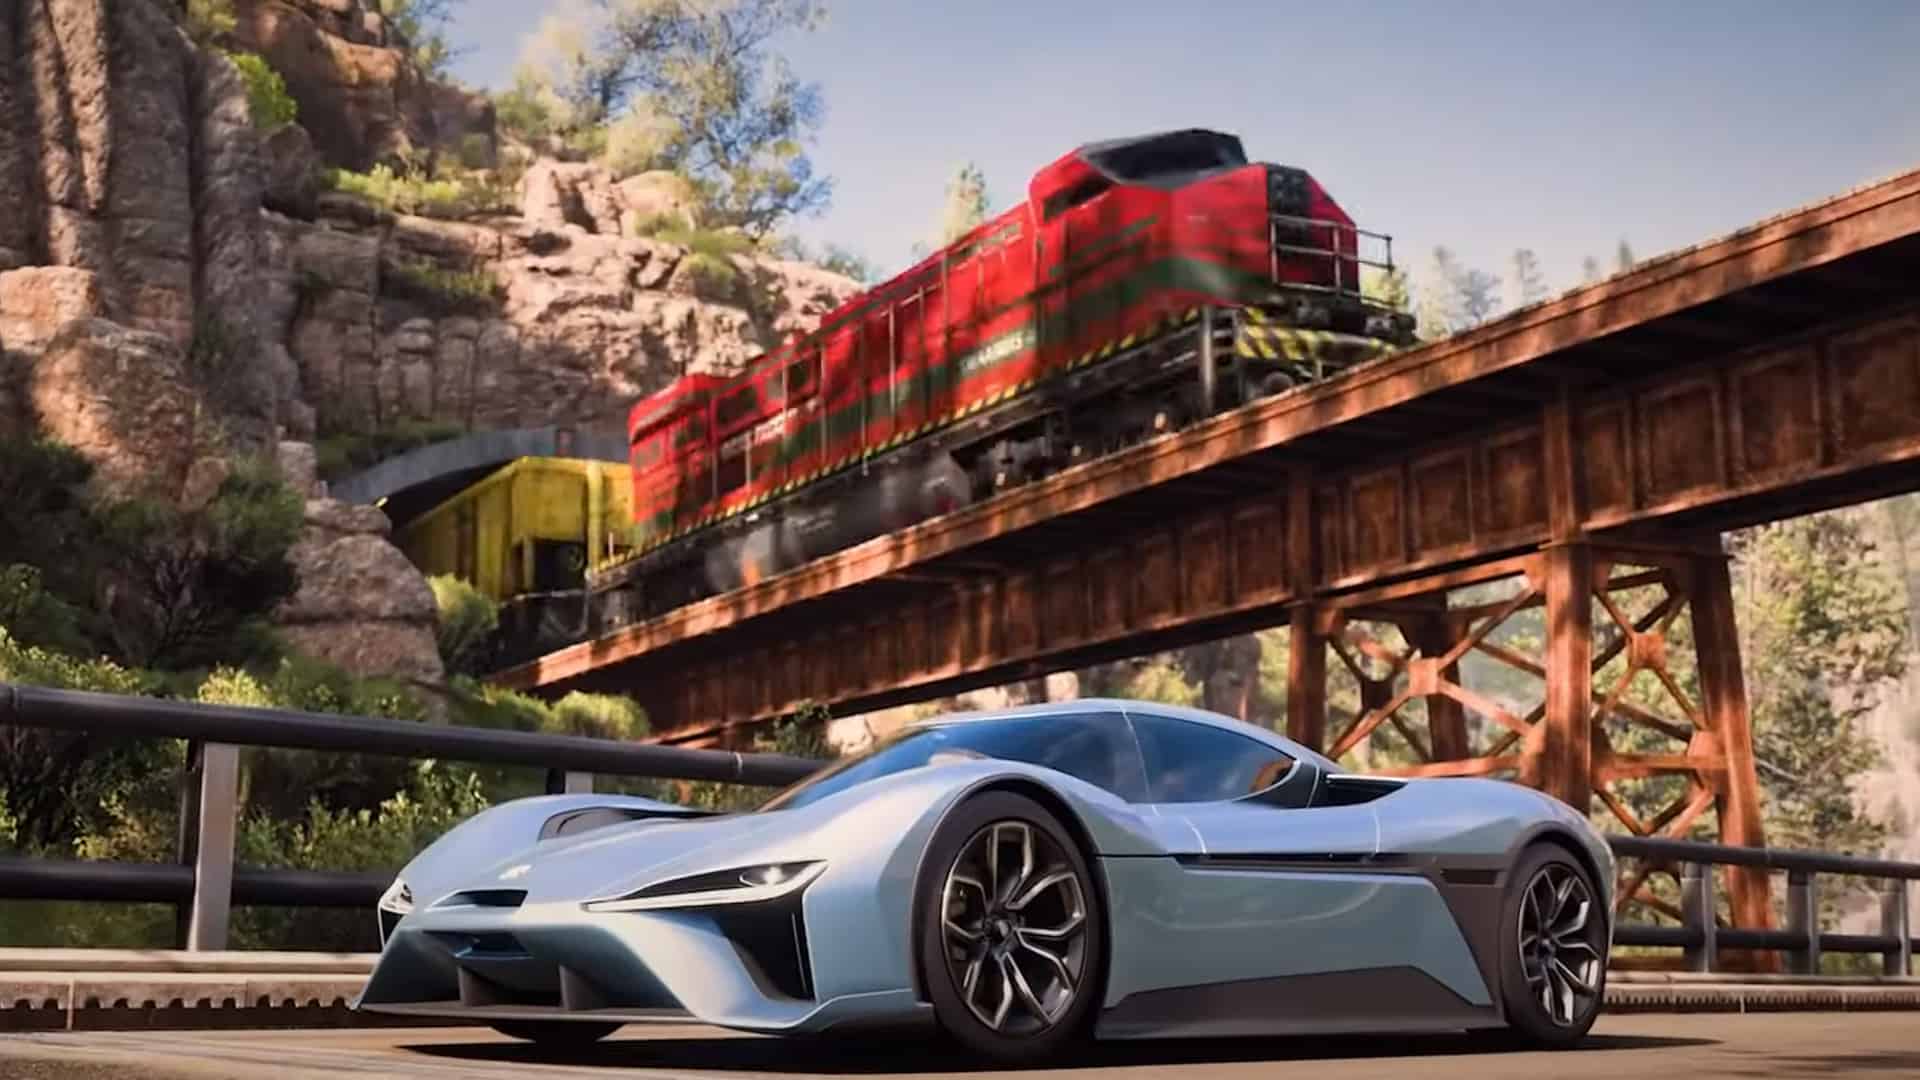 Forza Horizon 6 WON'T be set in JAPAN - here's why 